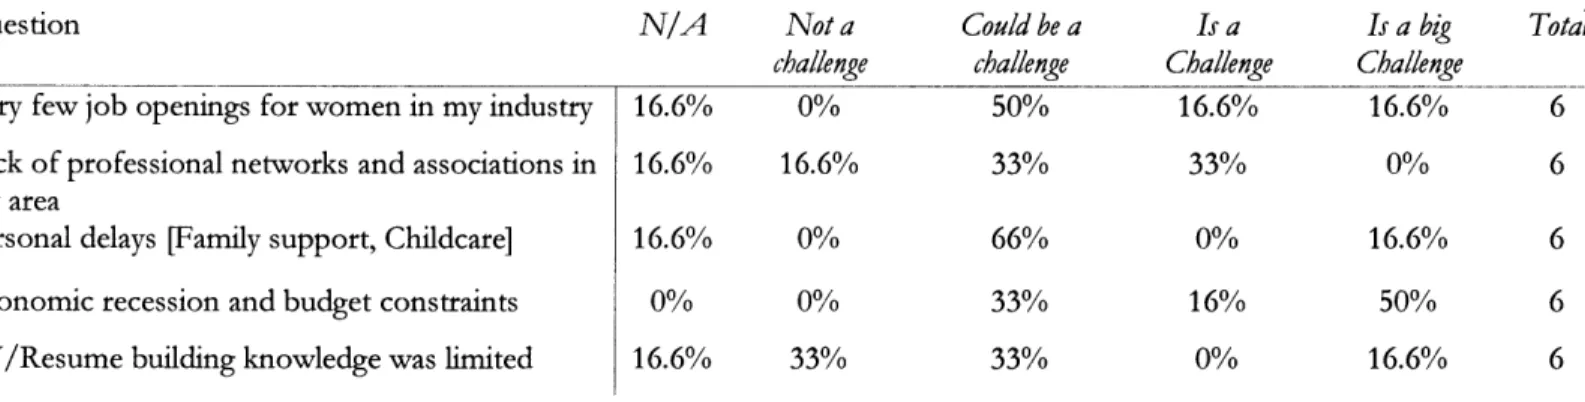 Table  4.8 Responses from  women  in  the Gulf states  in Architecture about initial barriers  to entry